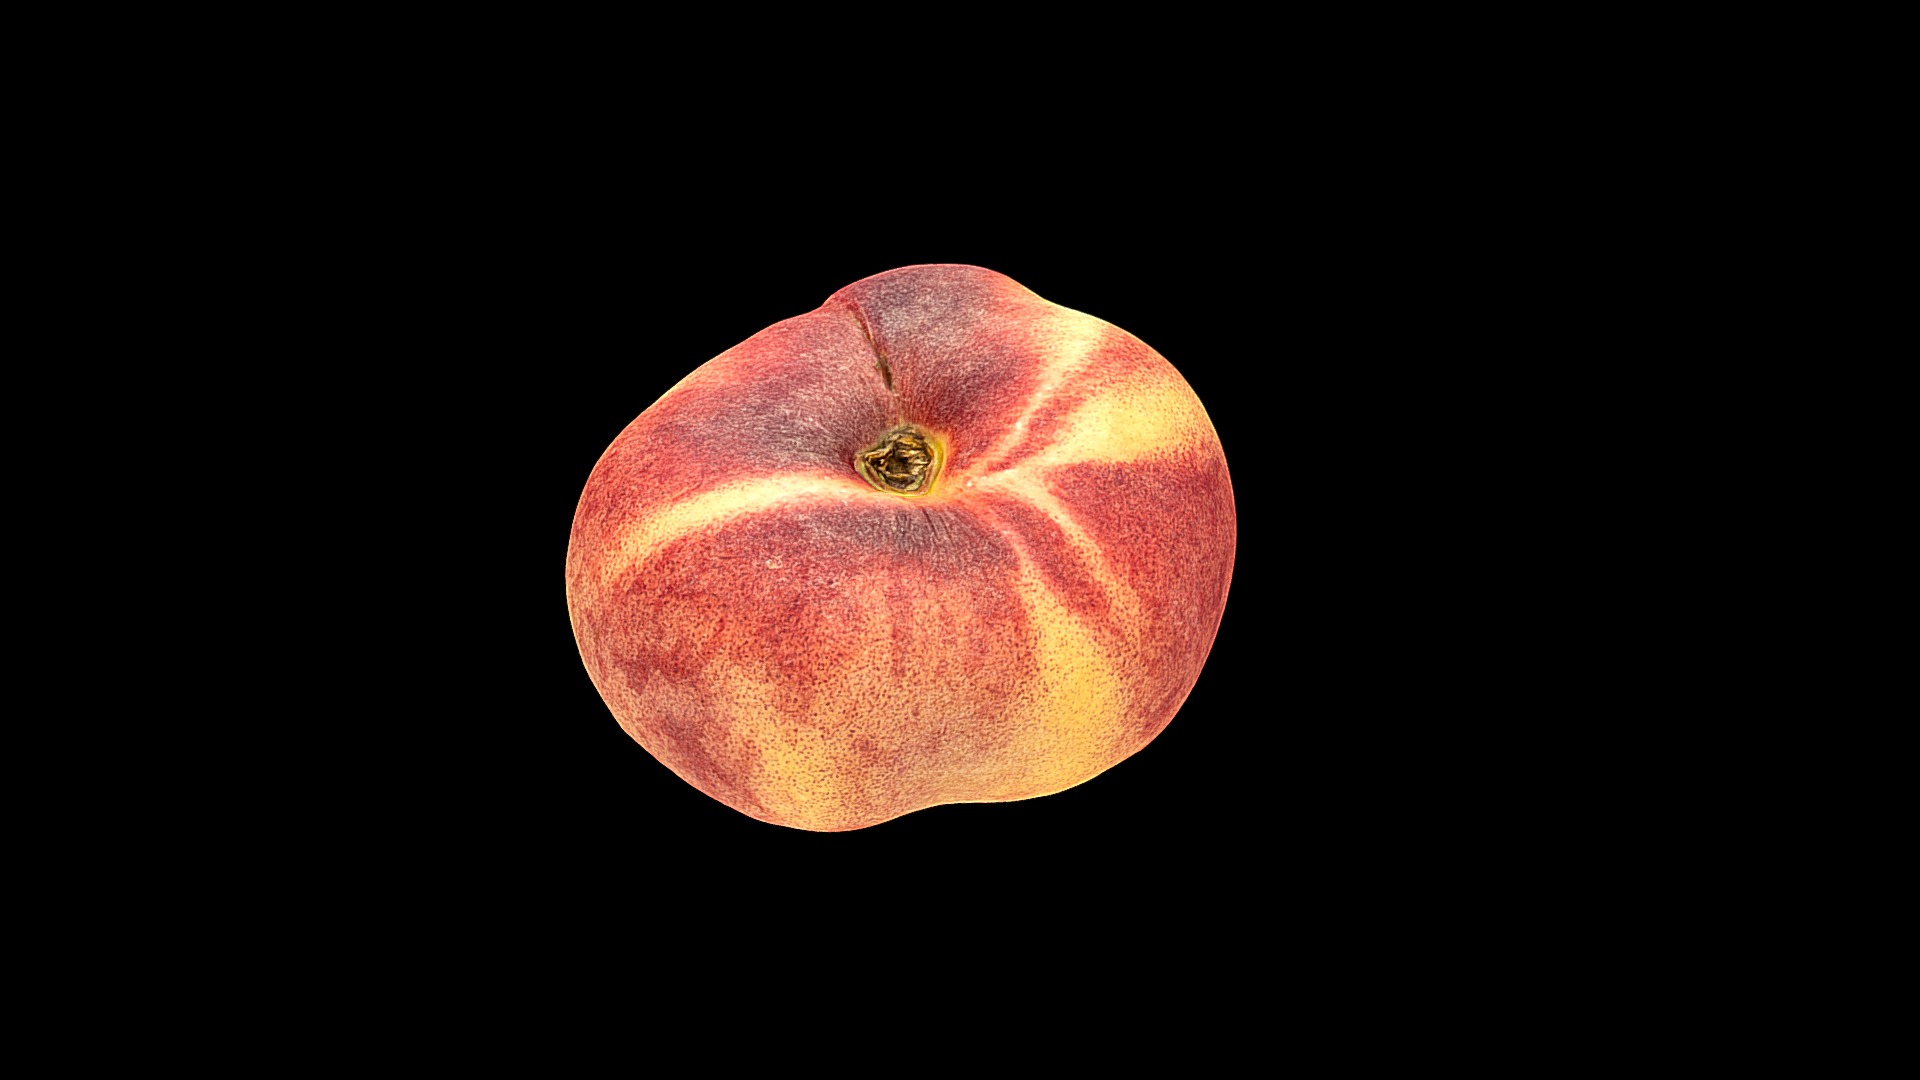 3D model Yet another peach - This is a 3D model of the Yet another peach. The 3D model is about a red apple with a black background.